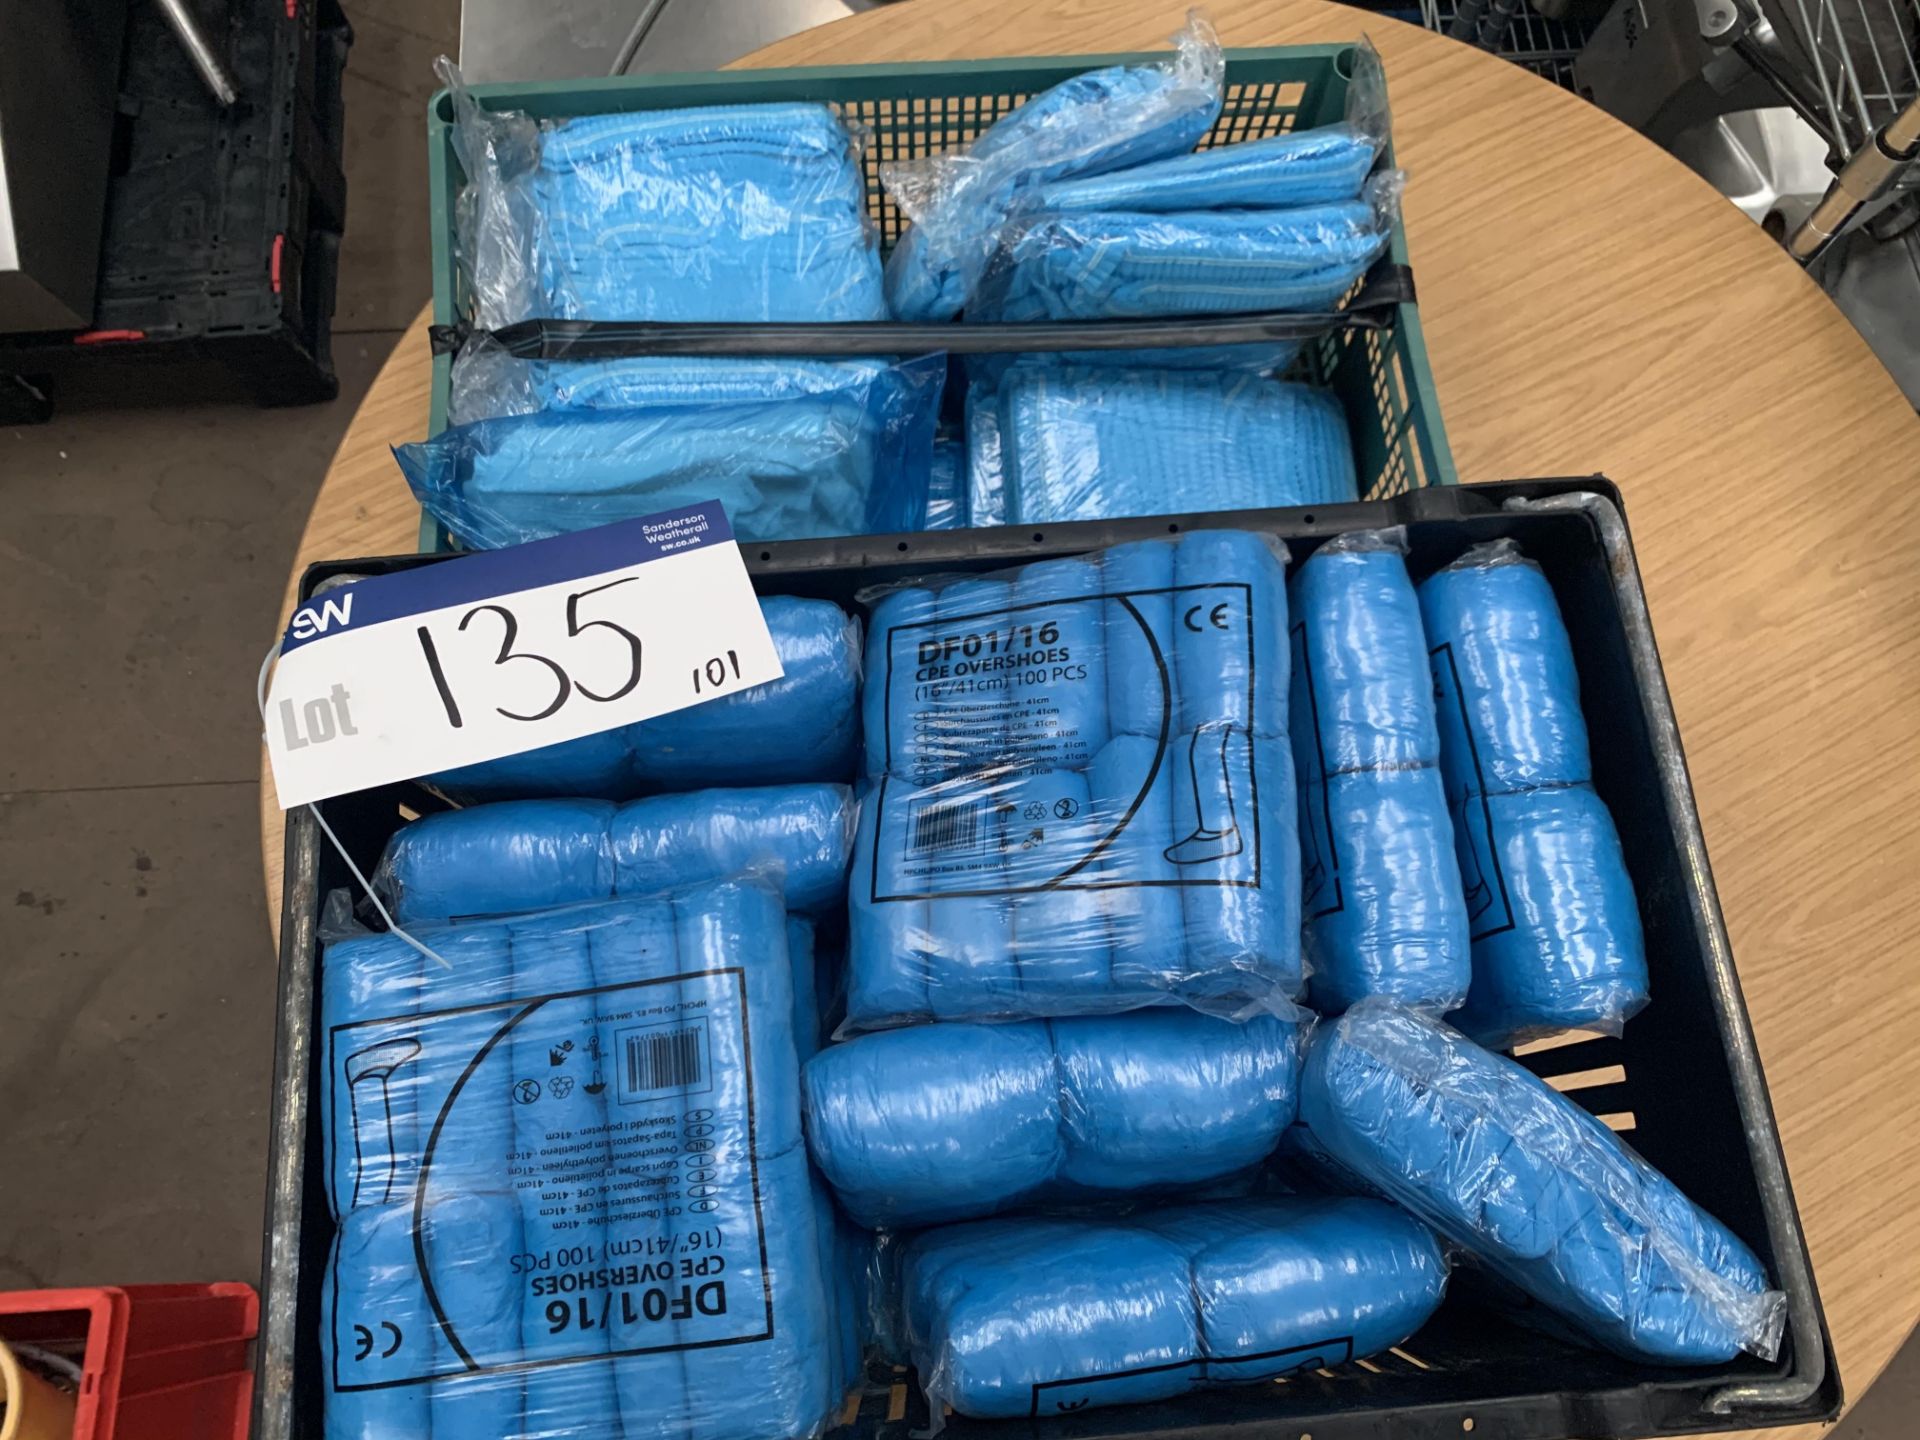 Two Trays, containing 15 packs of overshoe covers